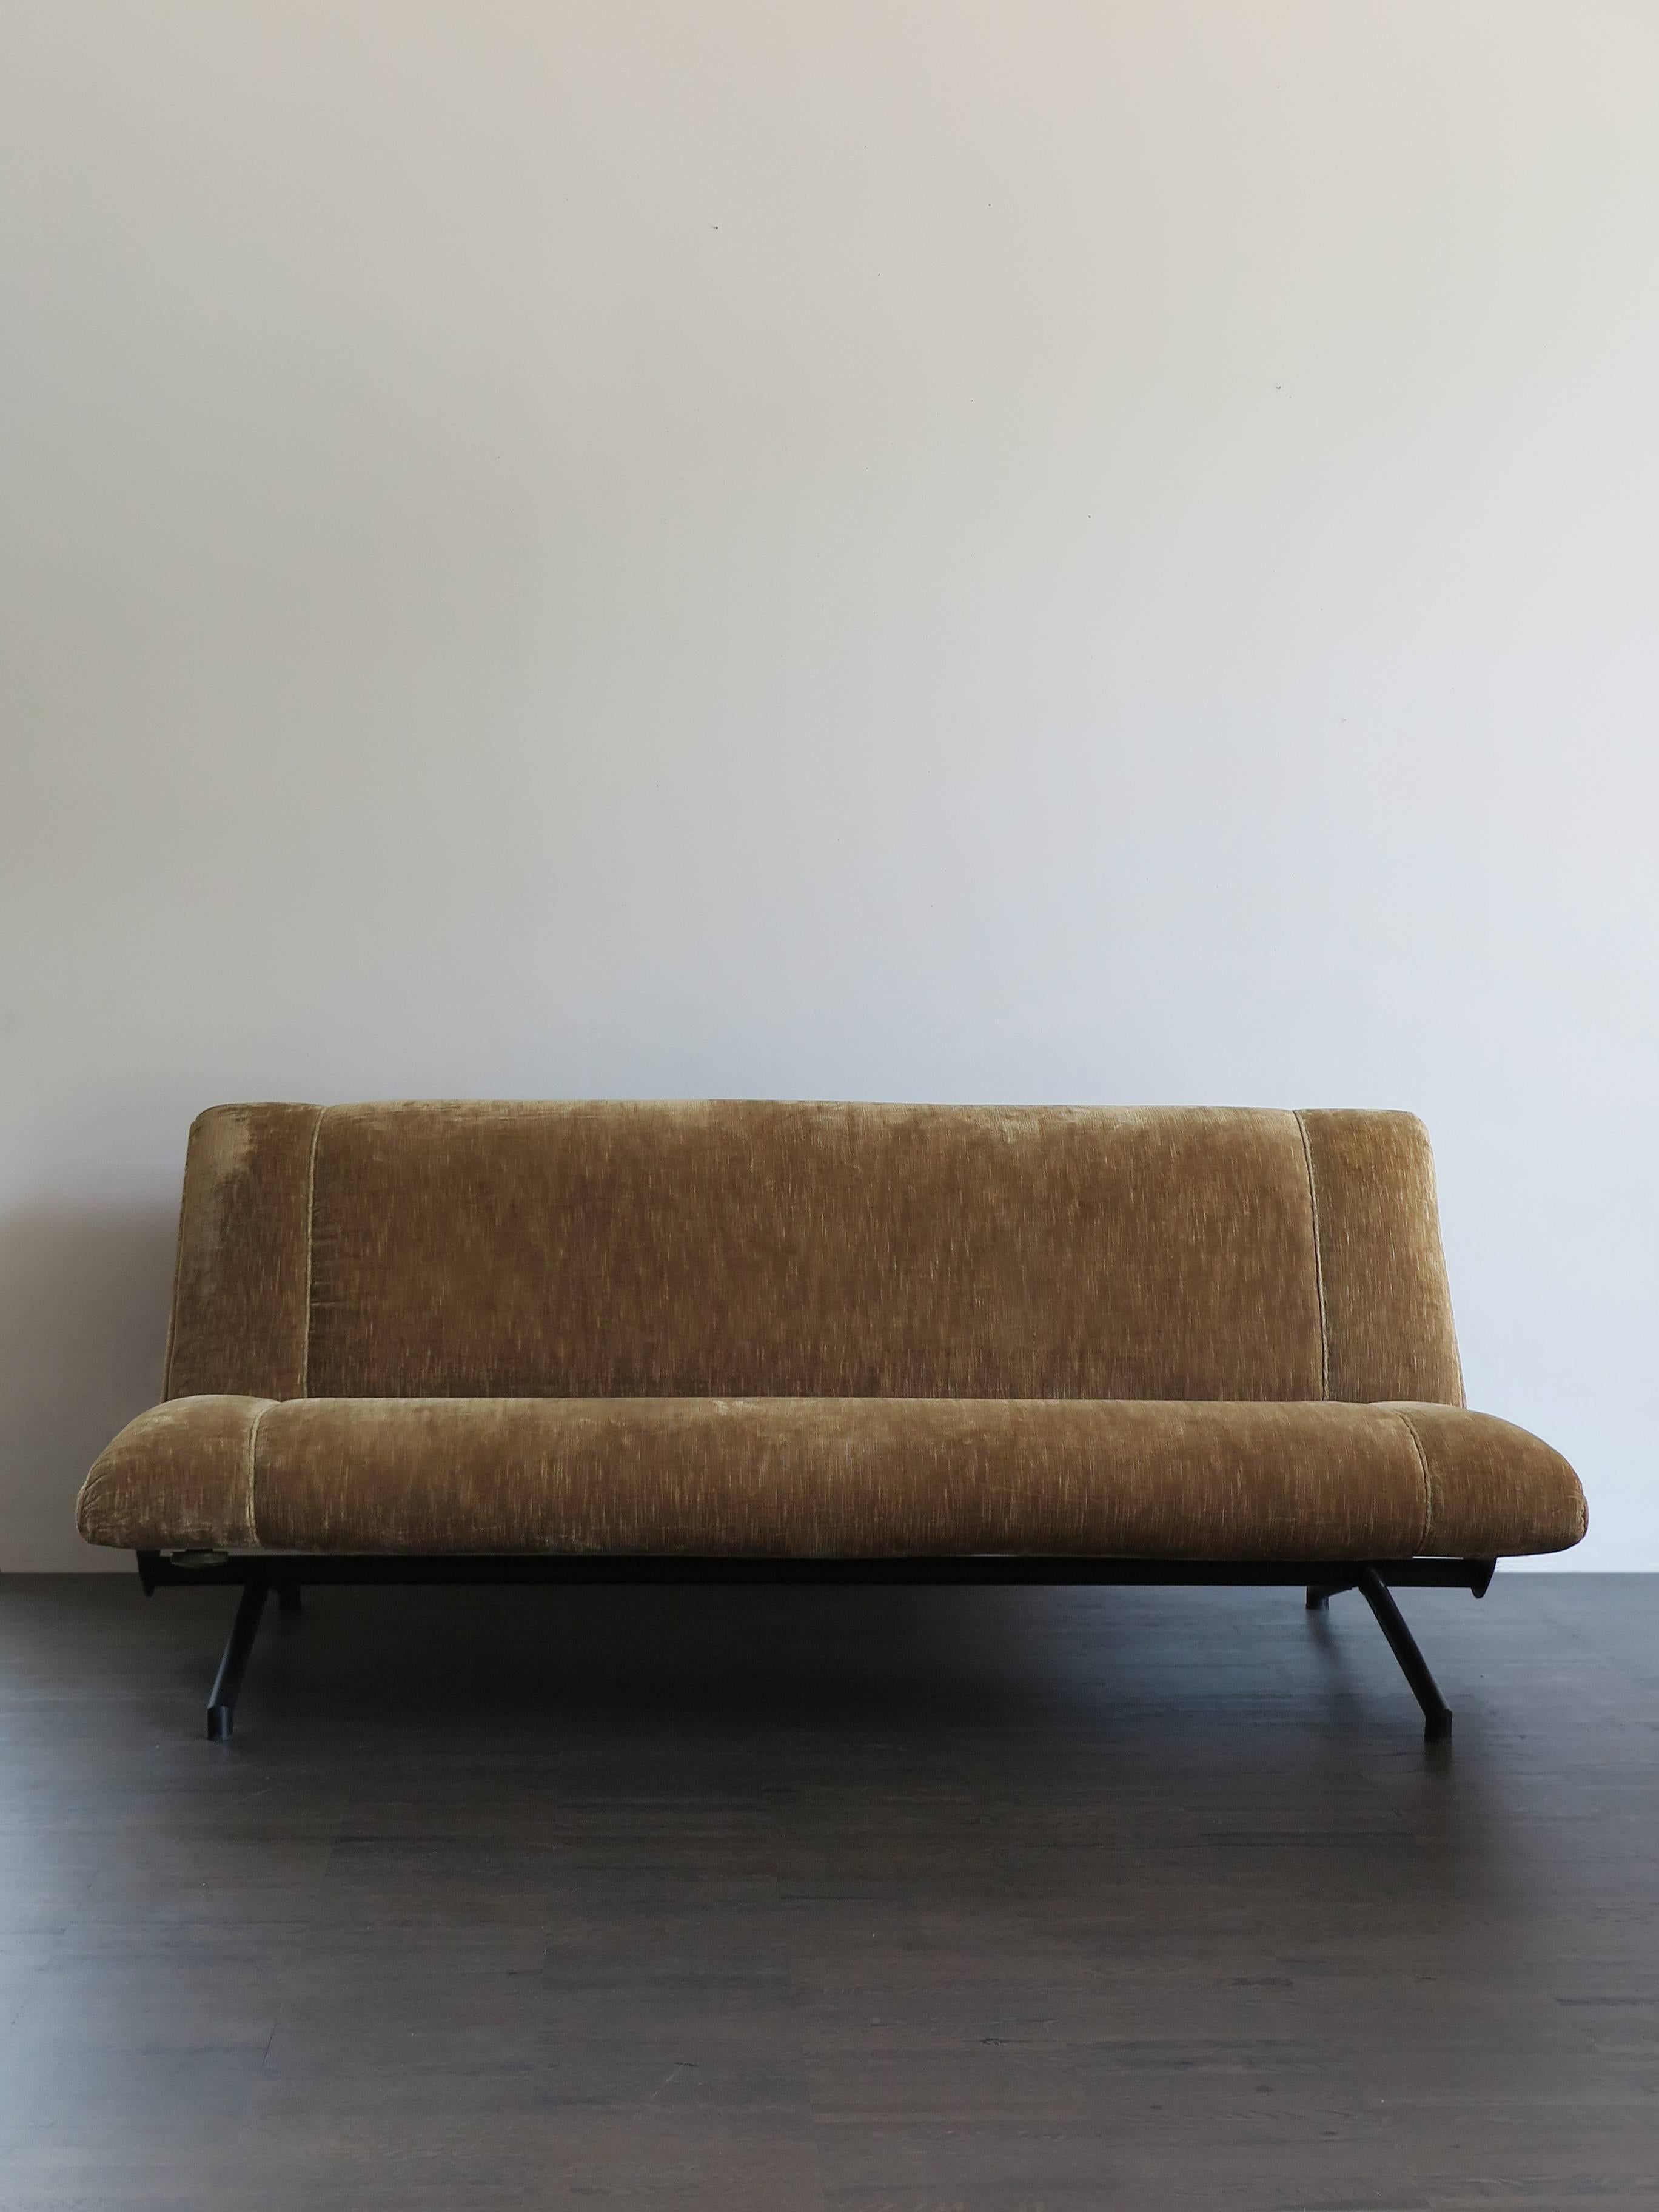 Iconic folding daybed sofa designed by Italian Osvaldo Borsani and manufactured by Tecno Italy in 1954. The sofa has a black lacquered tubular metal frame with brass adjusting details, polyurethane foam padding and velvet original upholstery.
This